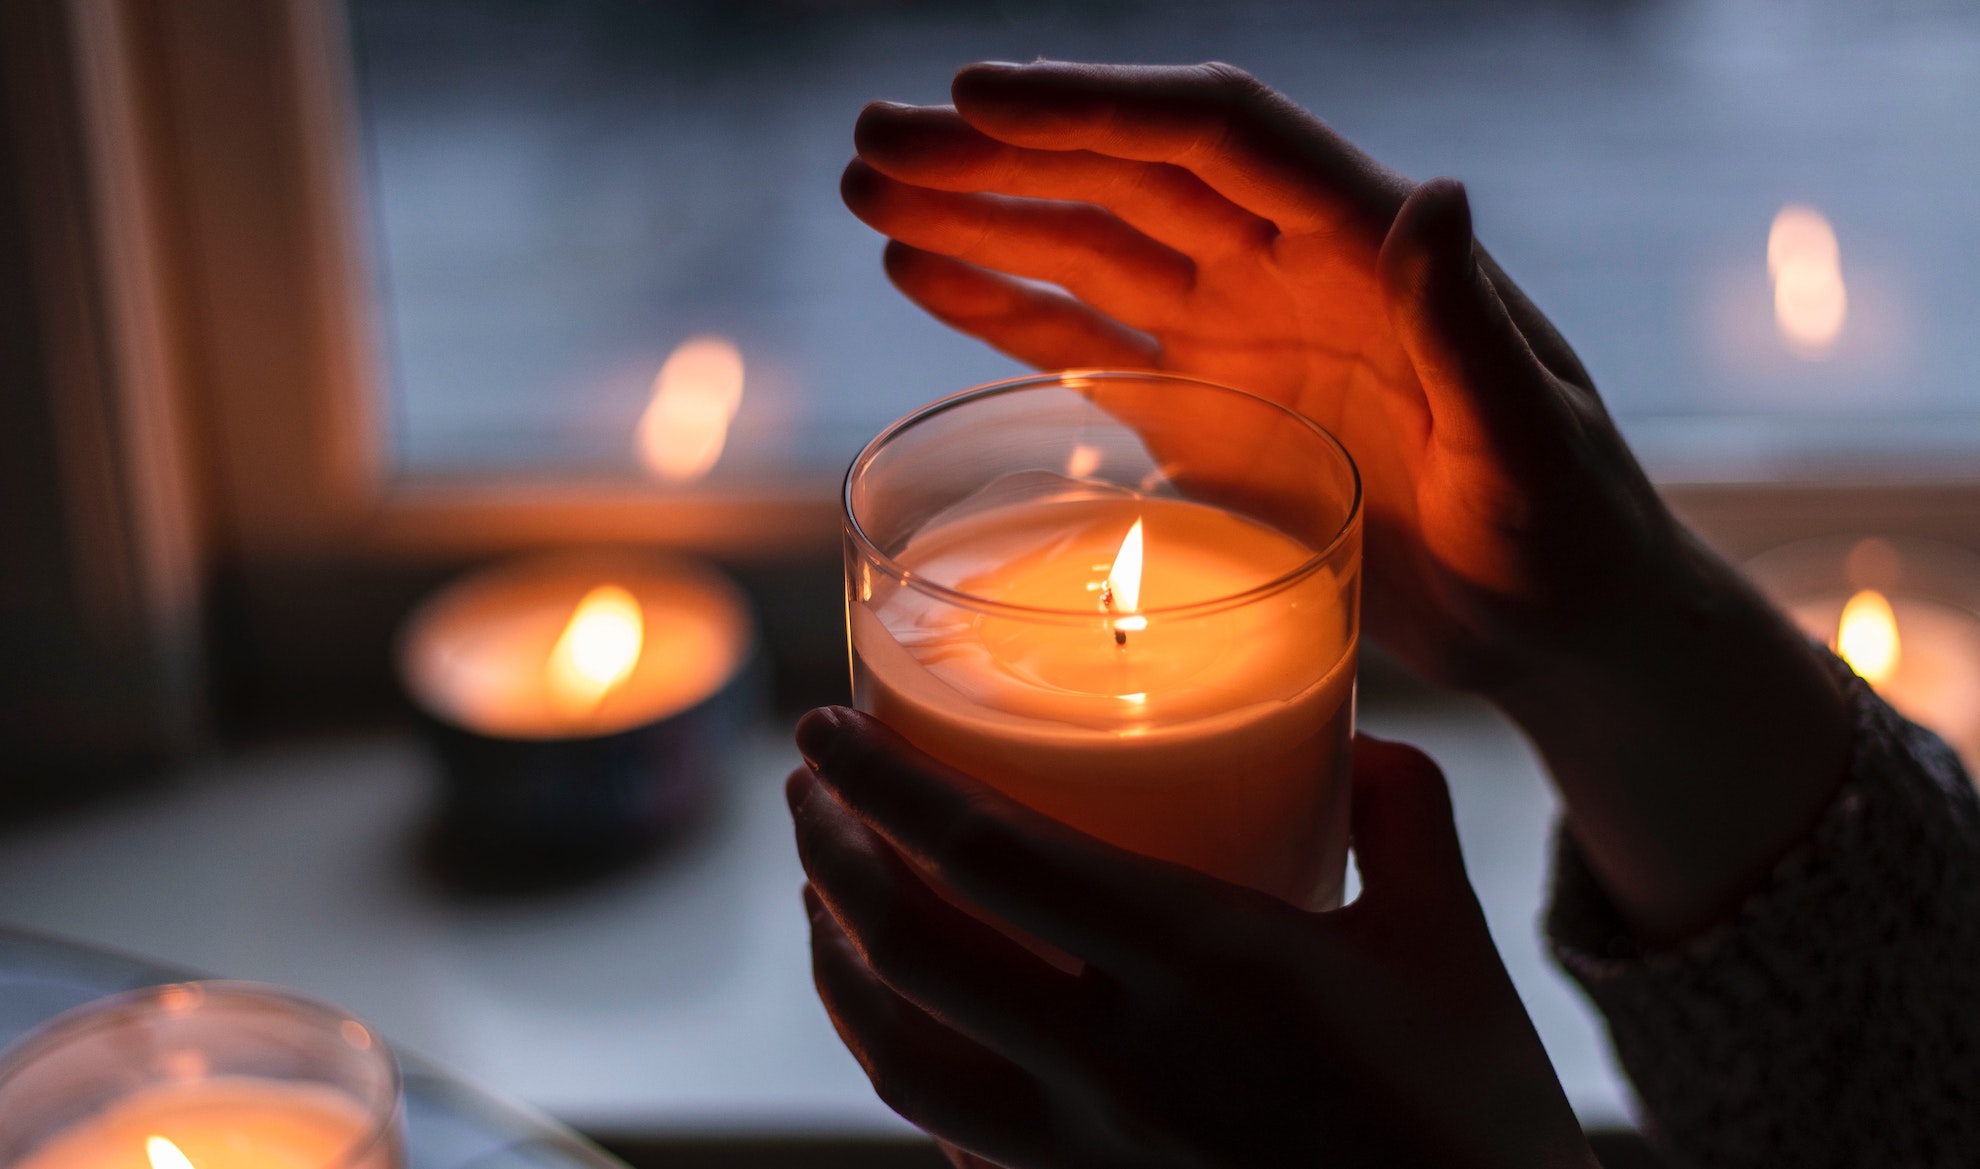 hands holding a lit candle